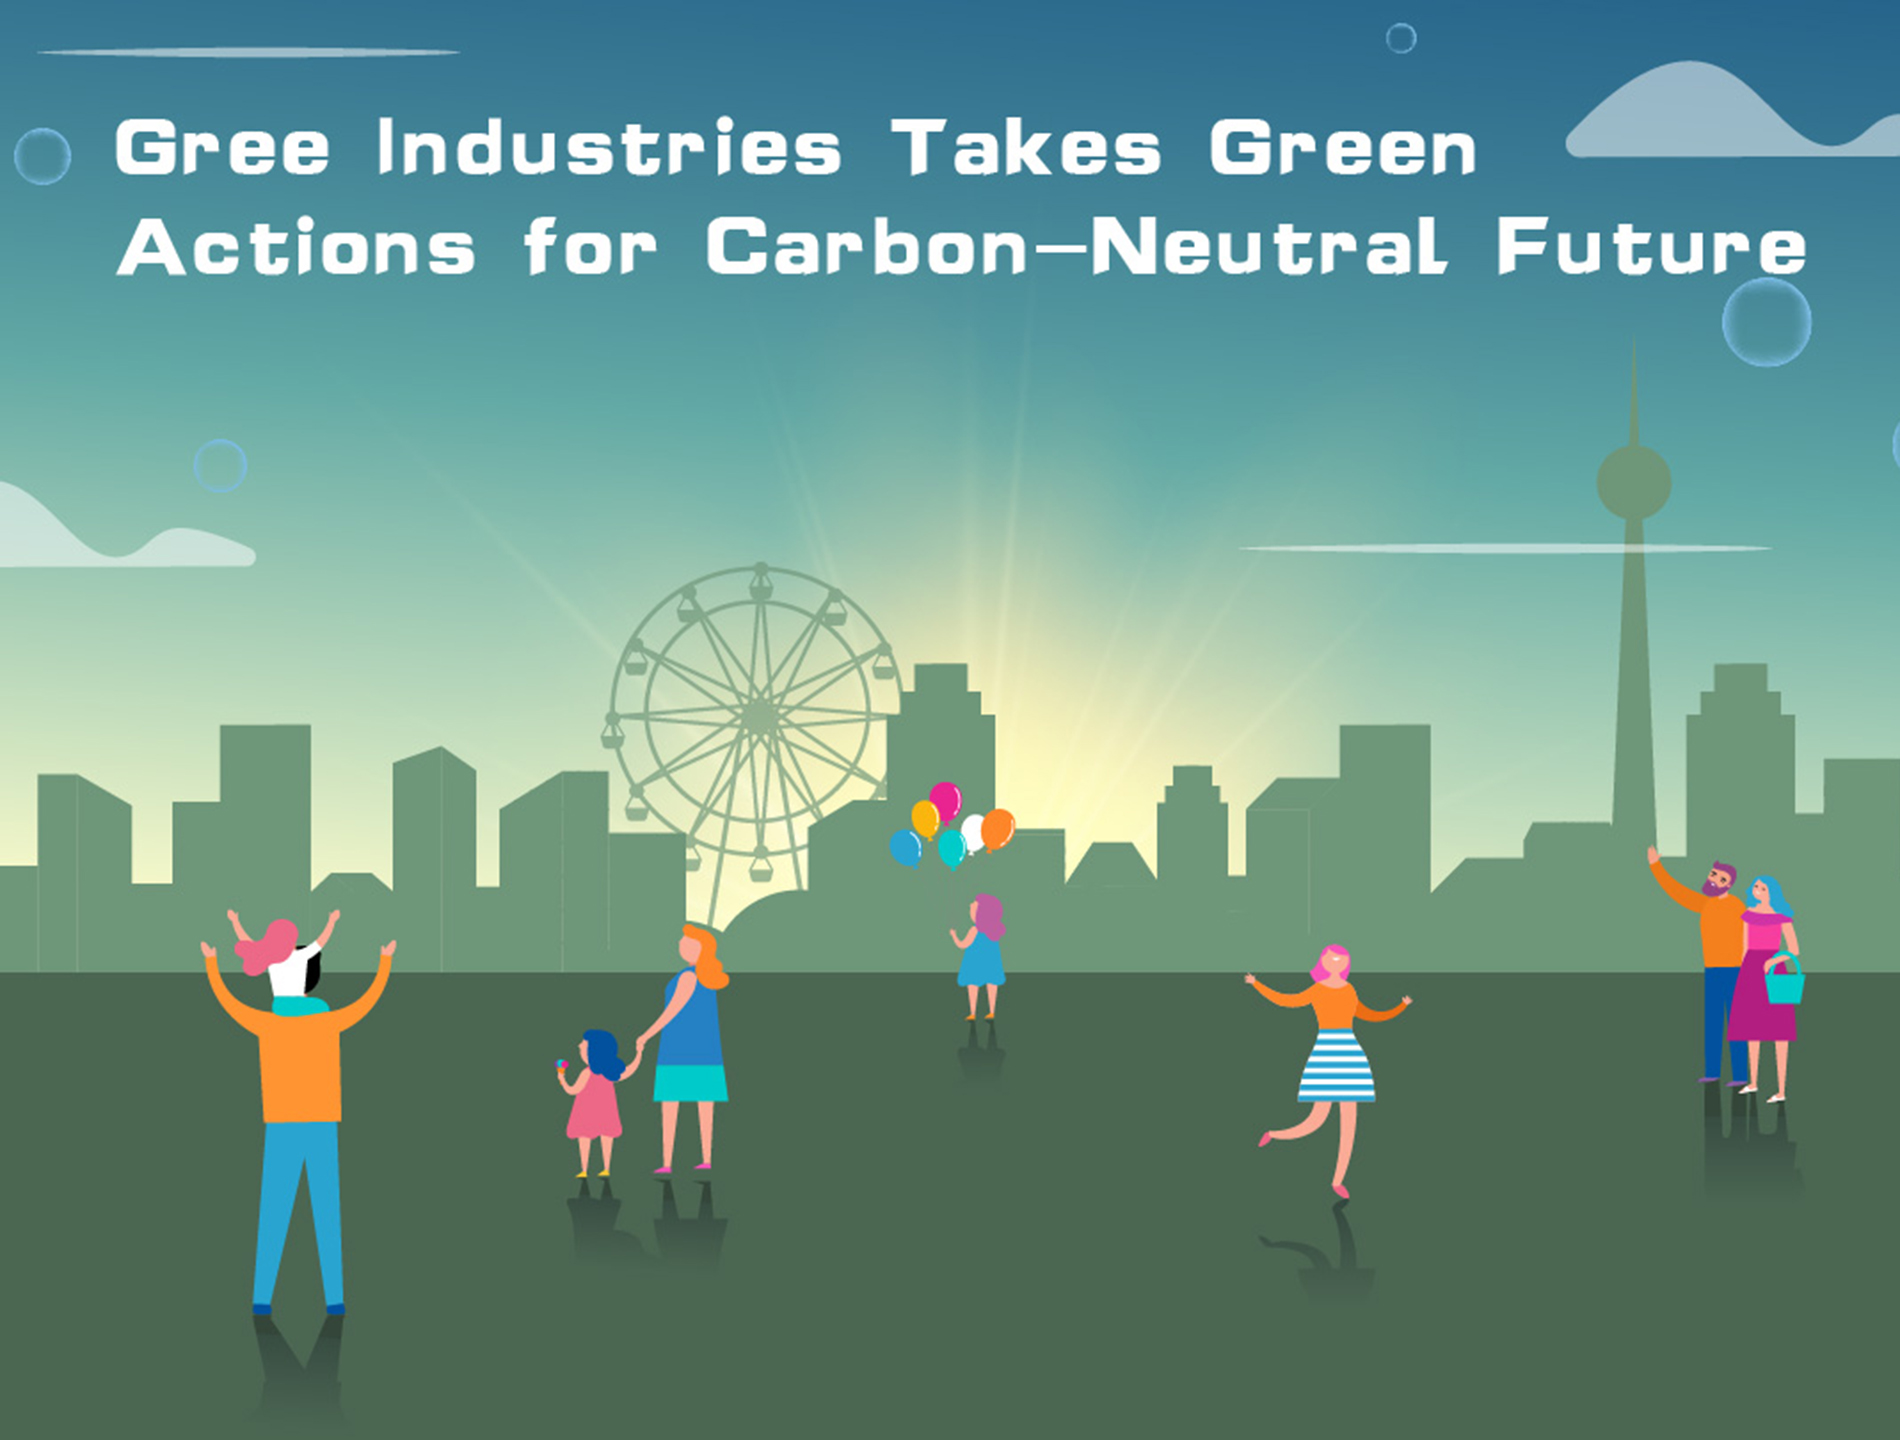 Gree Industries Takes Green Actions for Carbon-Neutral Future